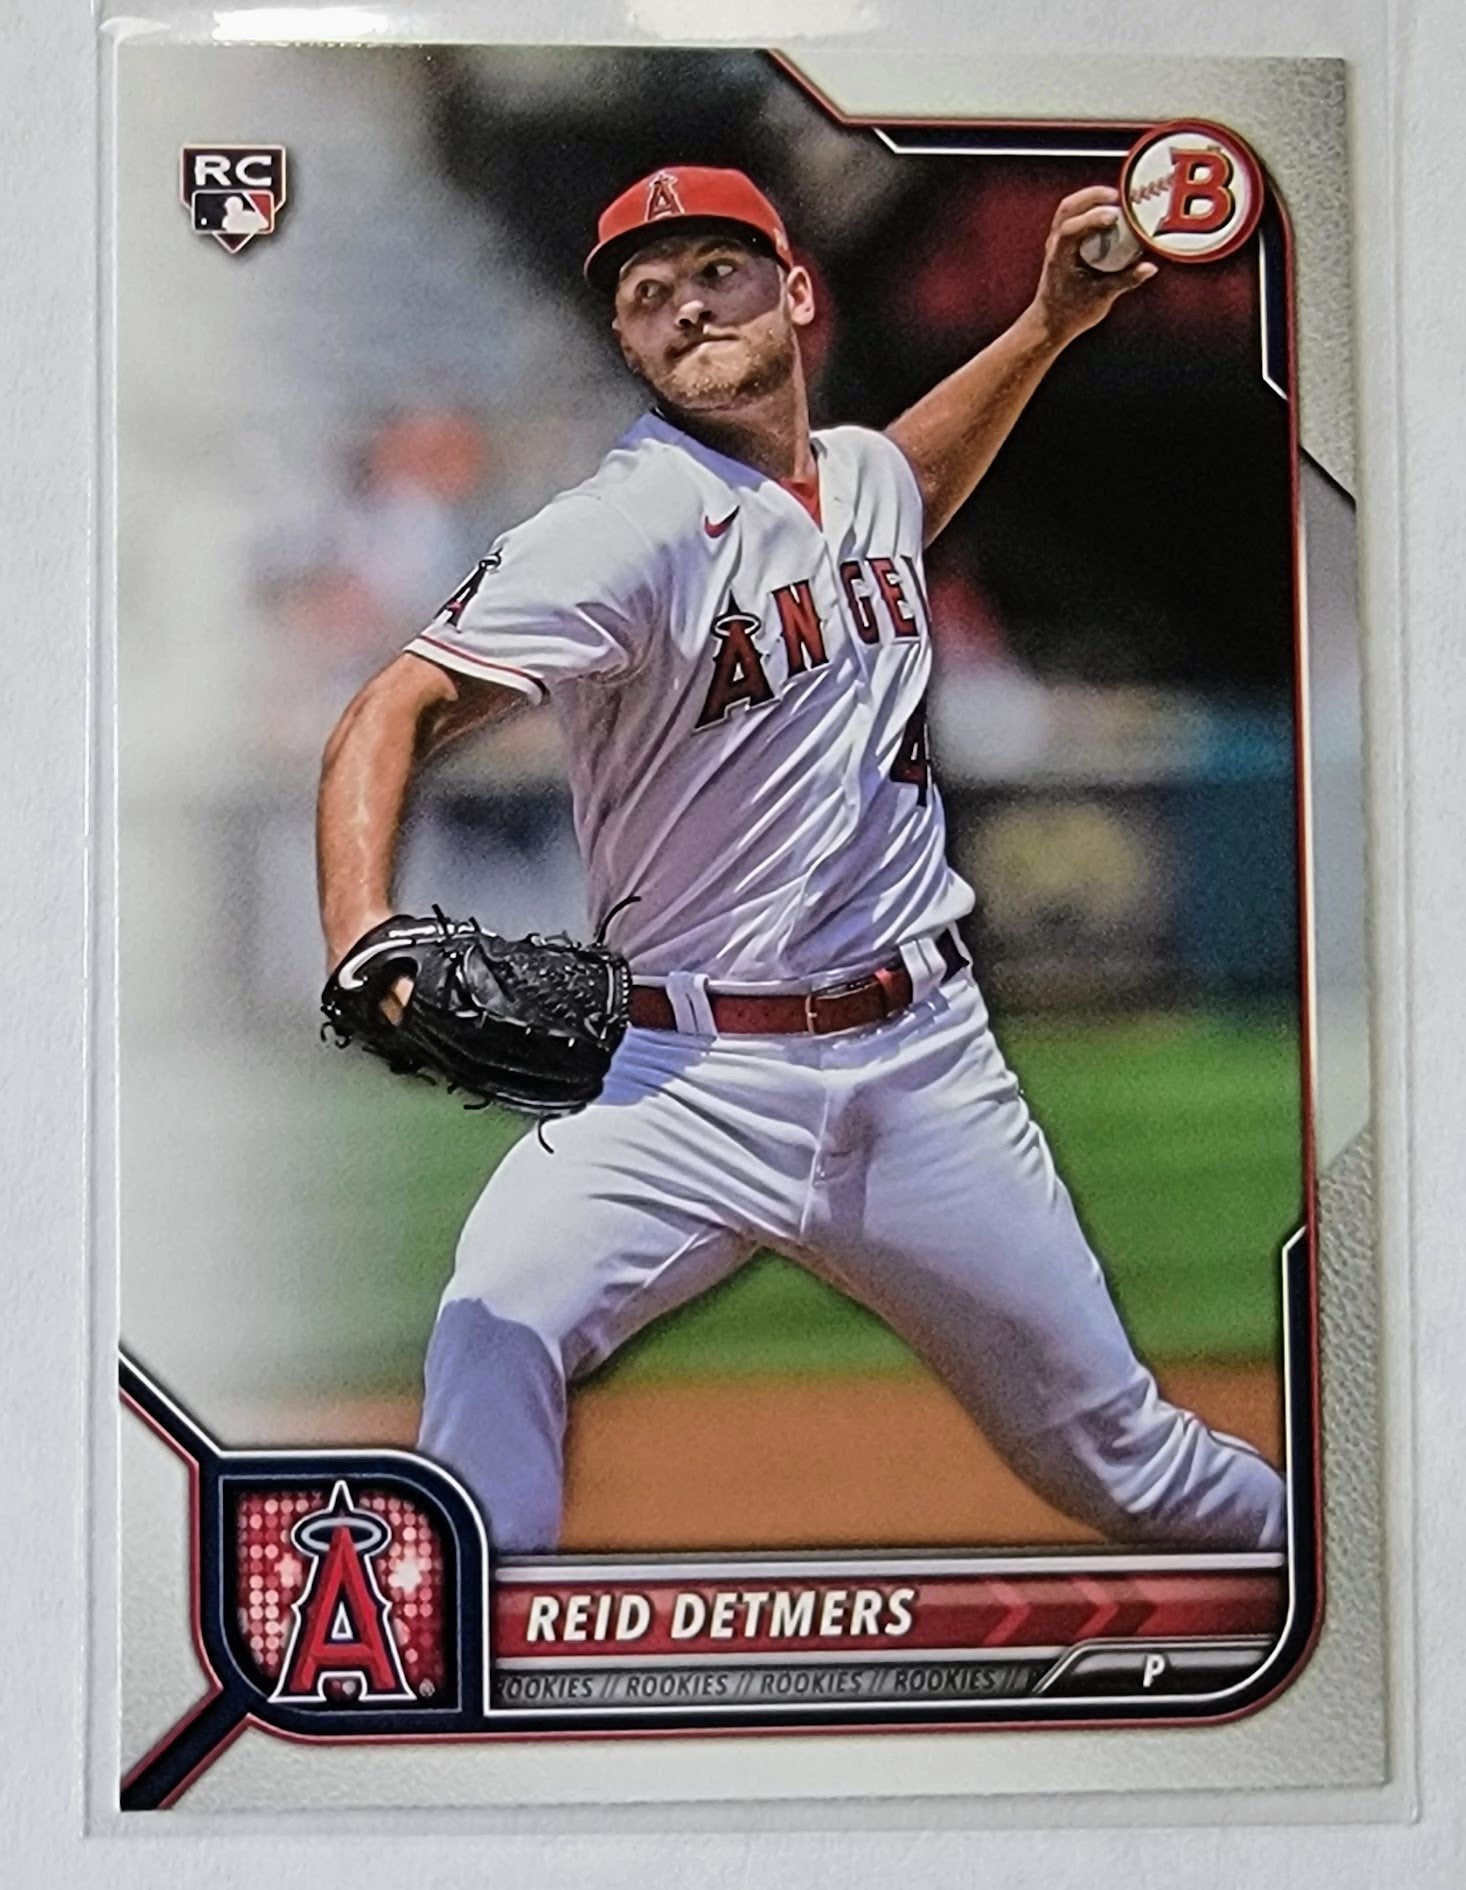 2022 Bowman Reid Detmers Rookie Baseball Trading Card SMCB1 simple Xclusive Collectibles   